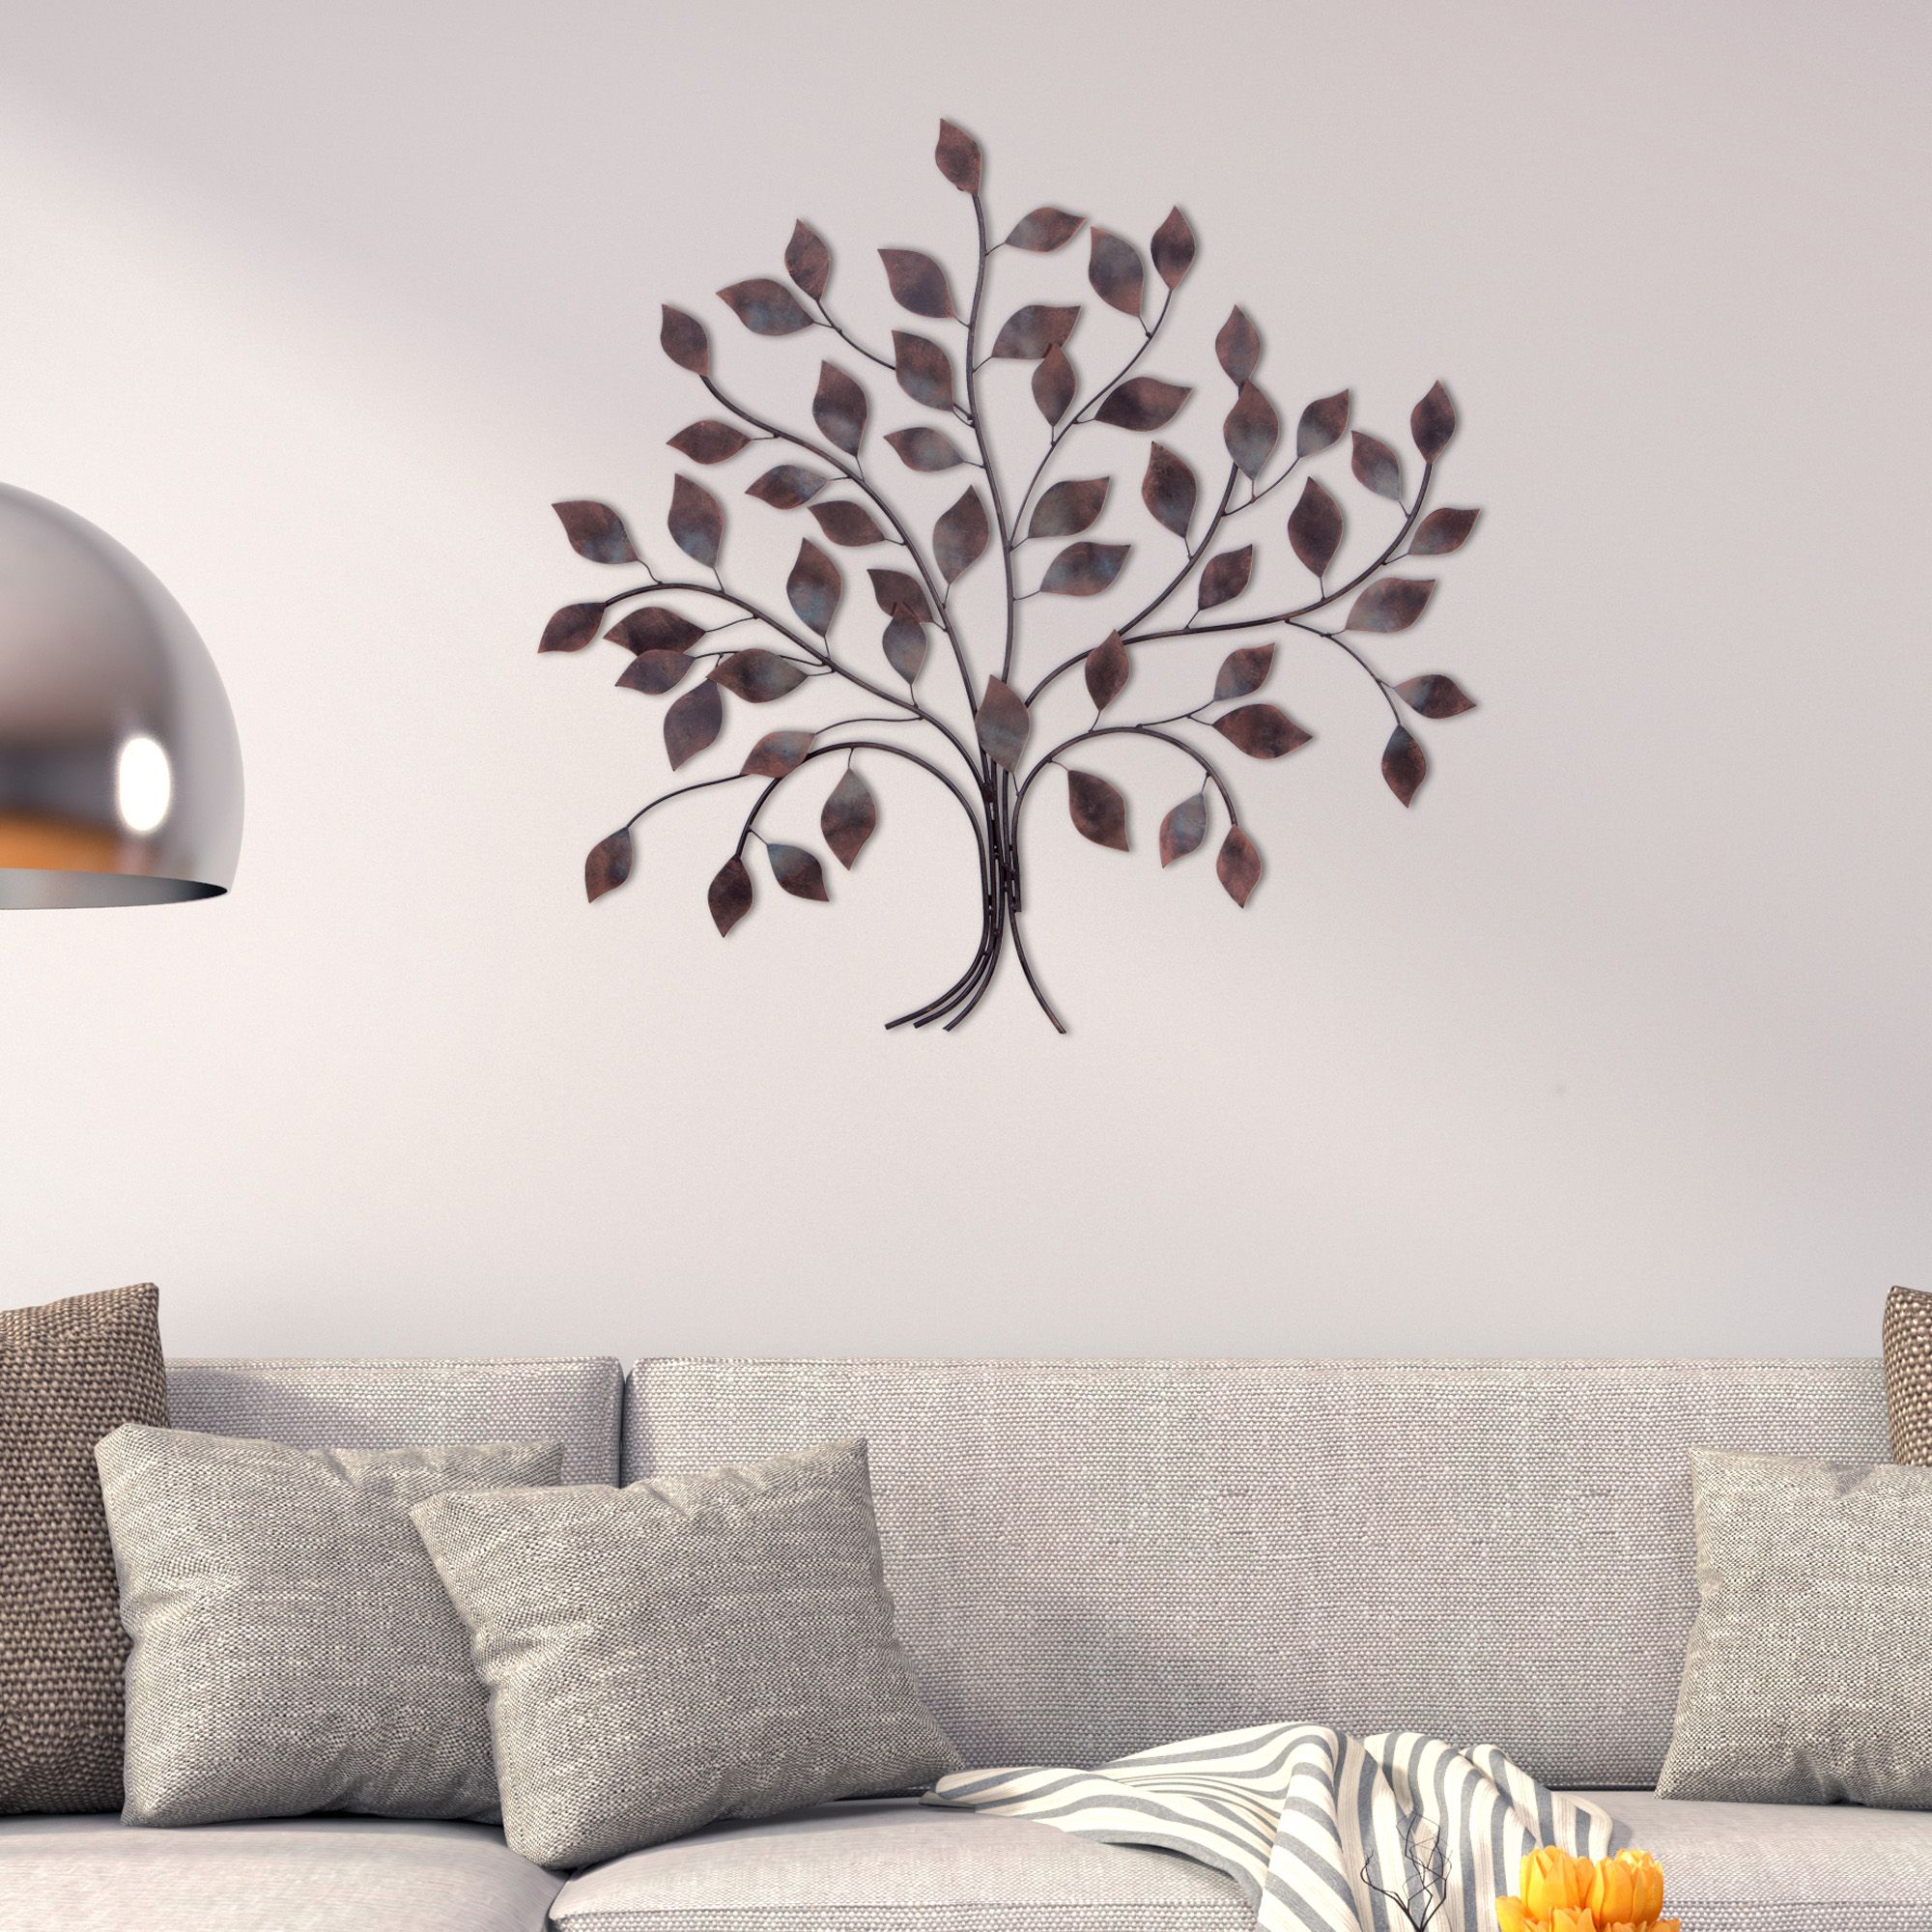 Patton Wall Decor Bronze Tree Branch Decorative Metal Wall Décor Pertaining To Fun Wall Art (View 10 of 15)